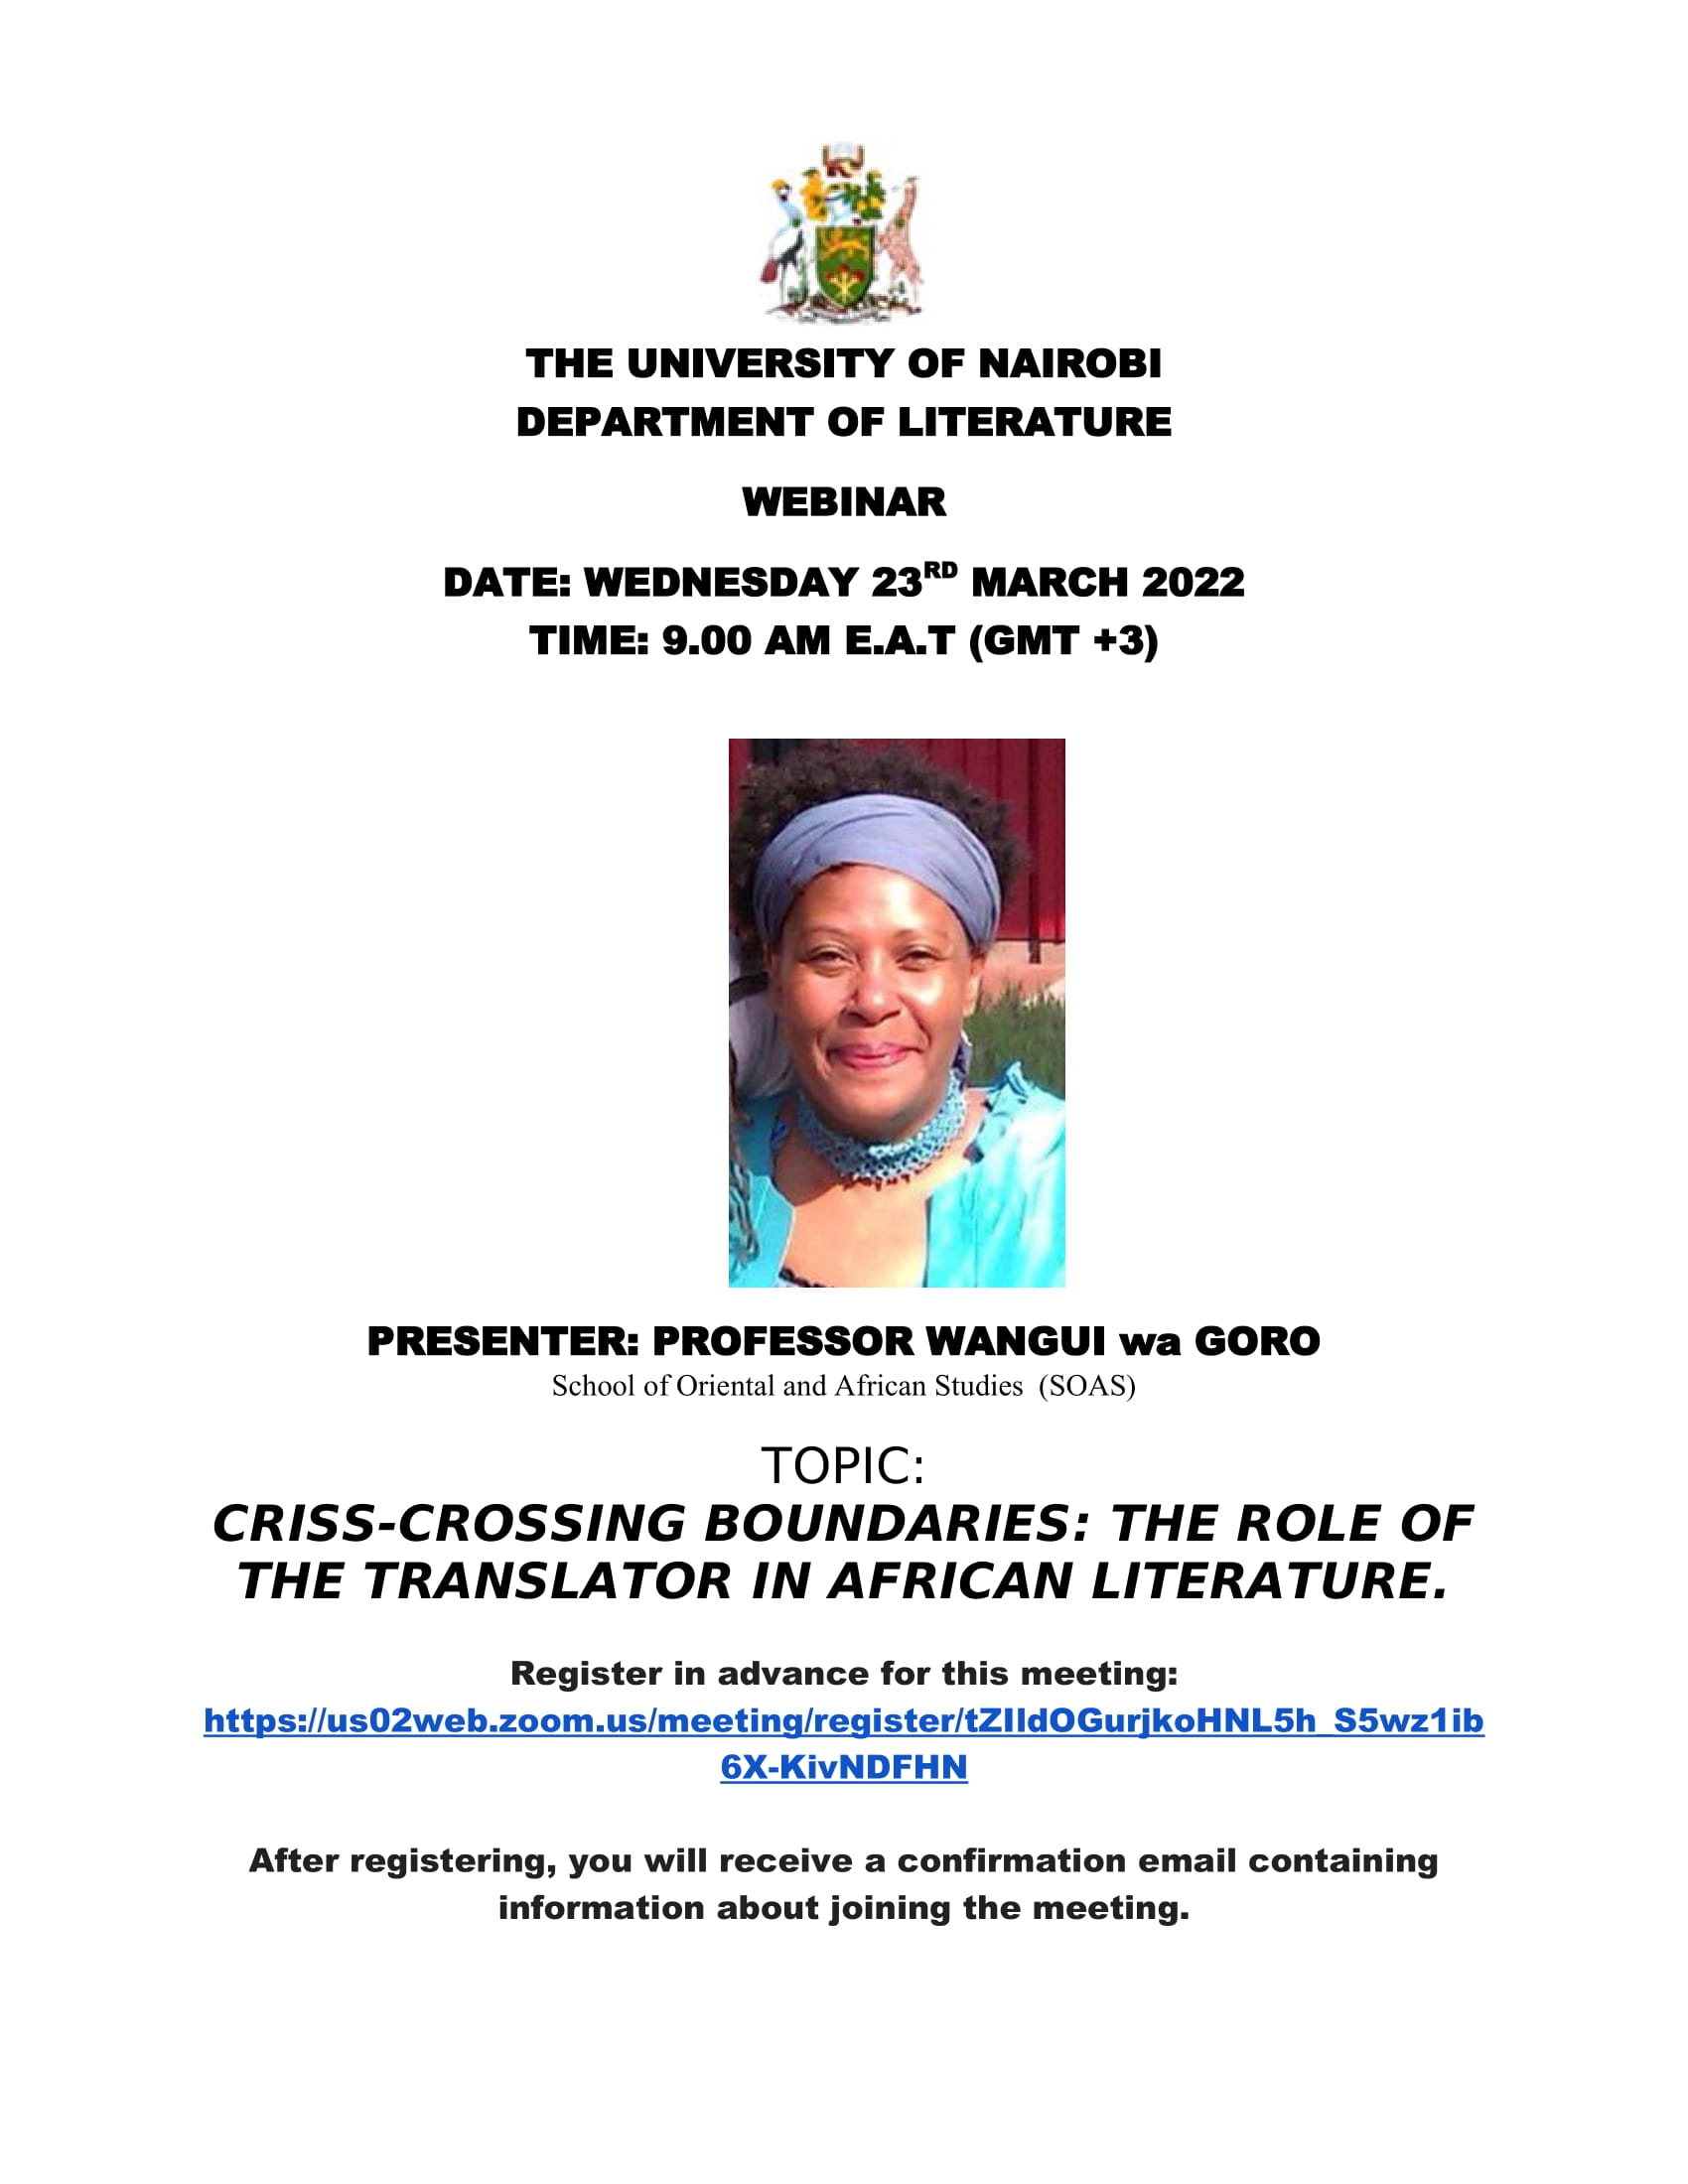 The Department of Literatute will host a webinar on Wednesday 23rd March 2022 at 9:00 am E.A.T (GMT +3) titled 'CRISS-CROSSING BOUNDARIES : THE ROLE OF THE TRANSLATOR IN AFRICAN LITERATURE'